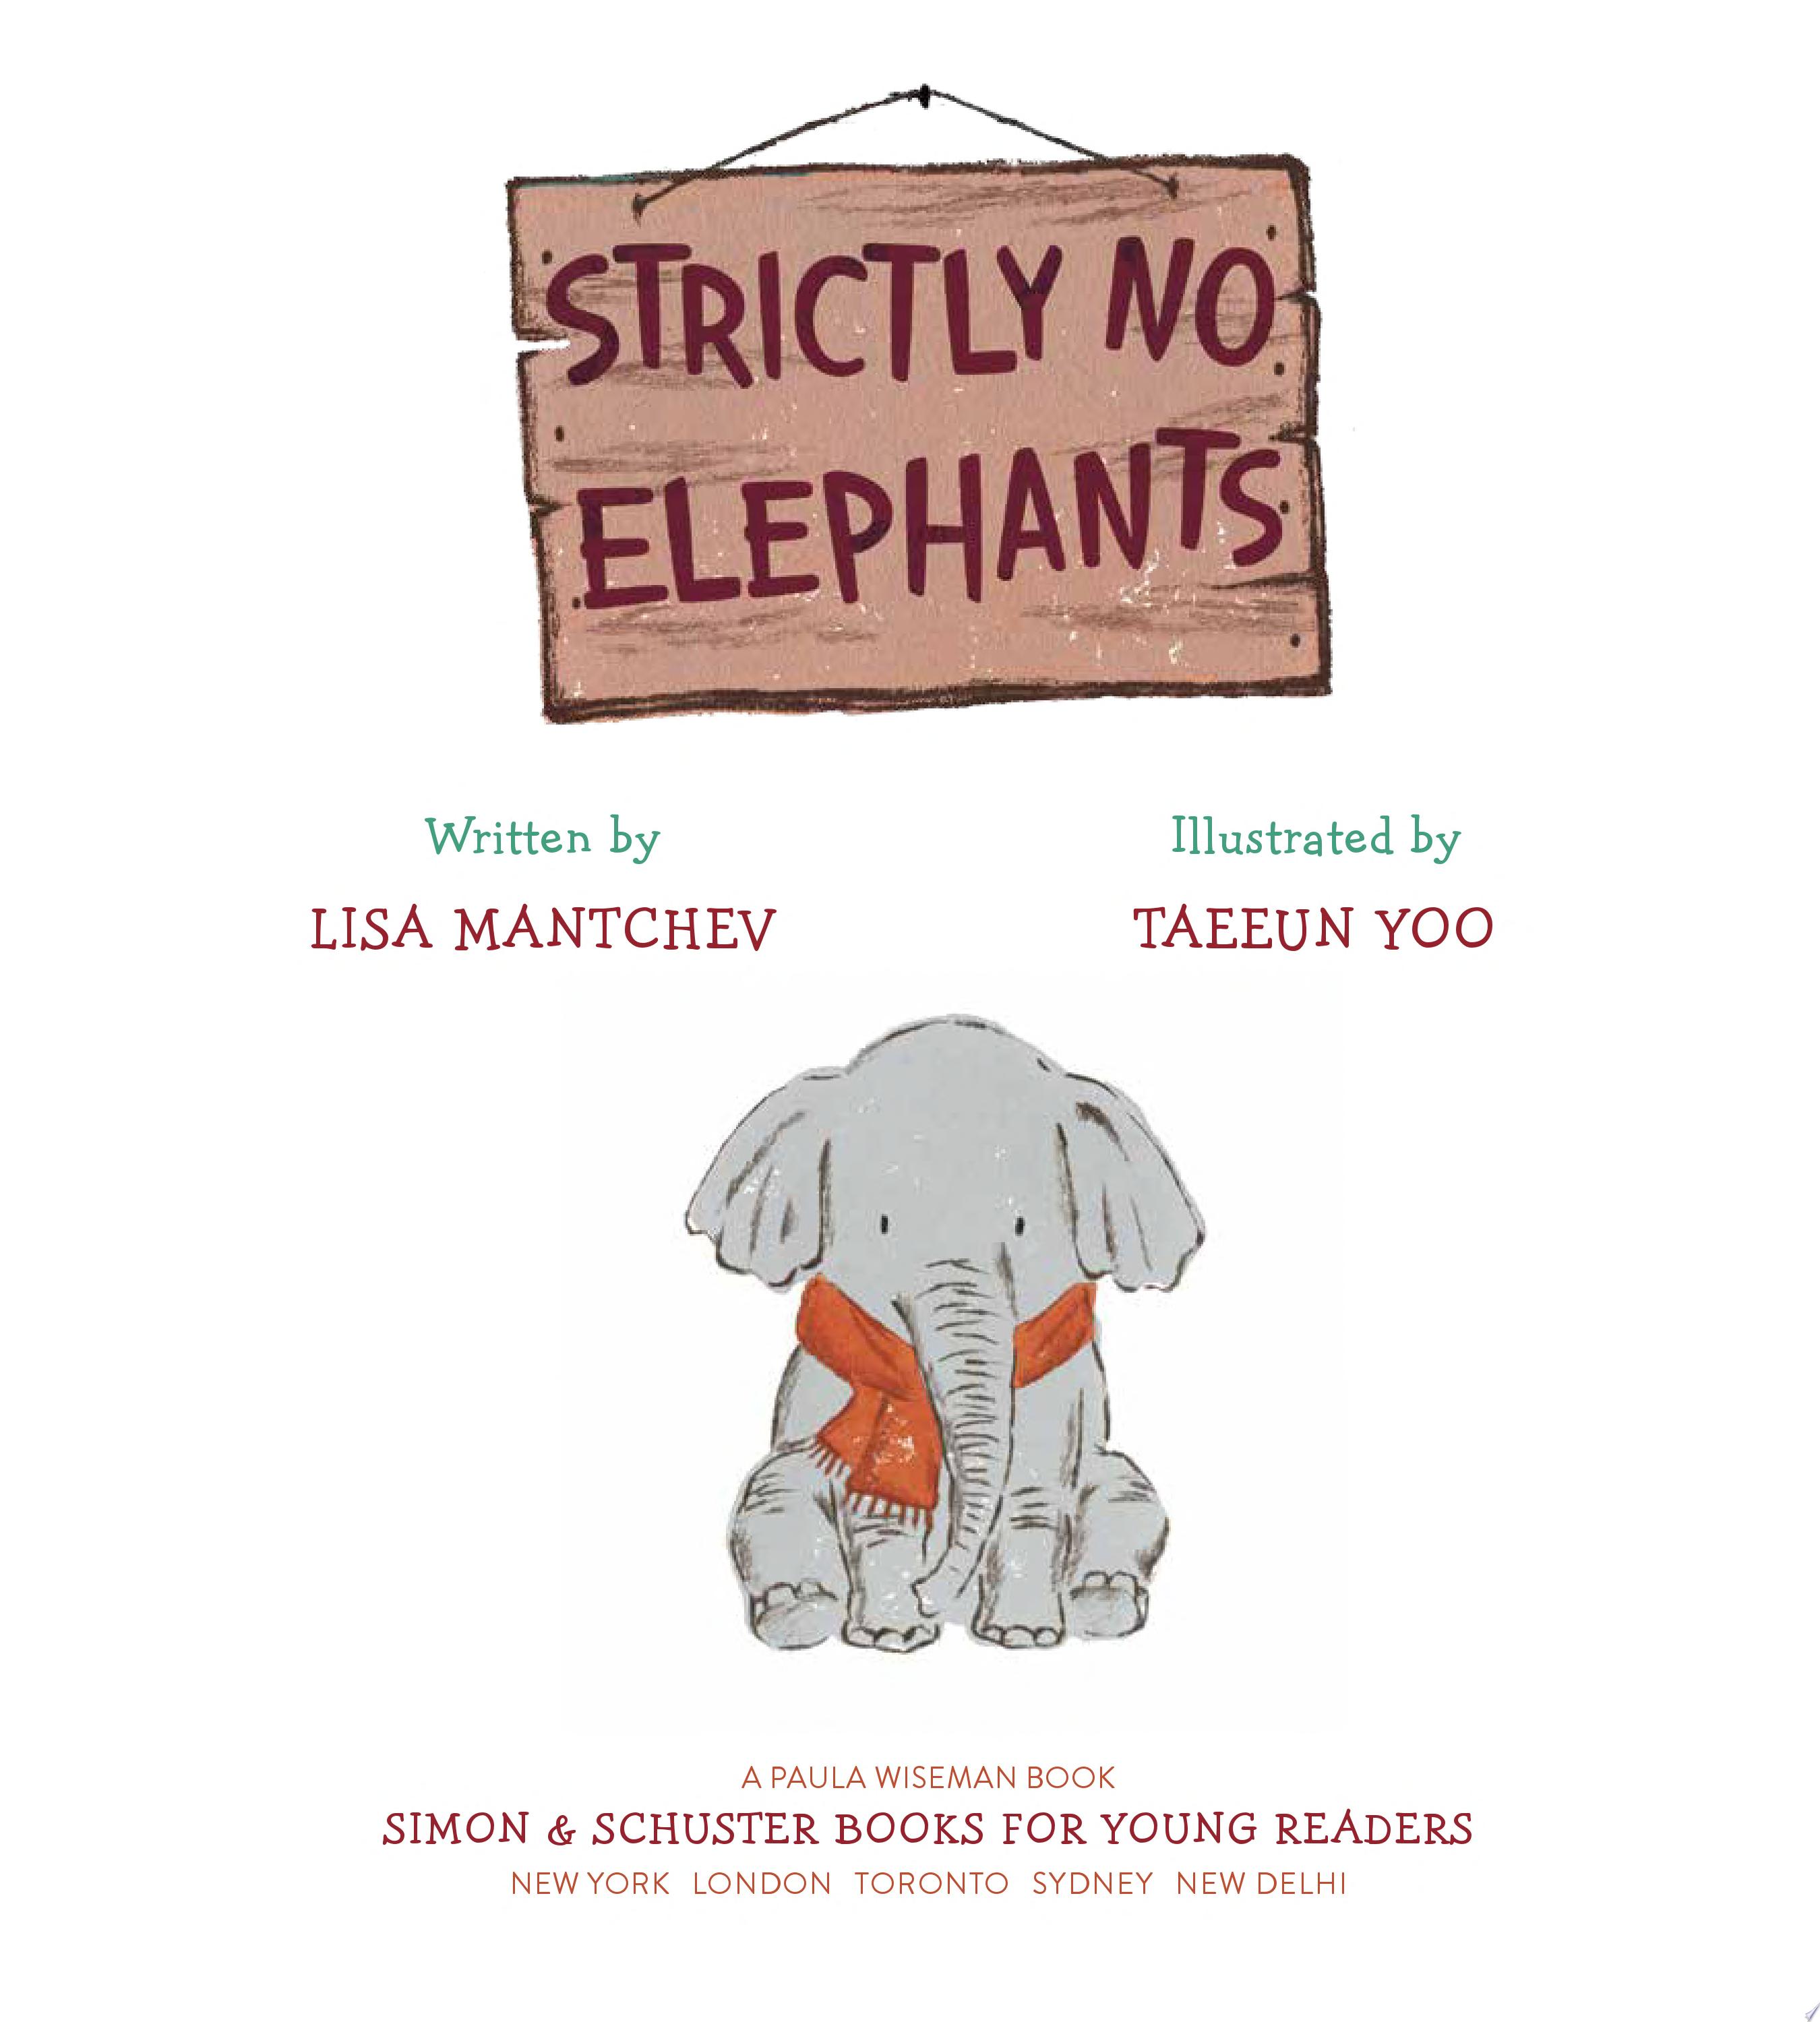 Image for "Strictly No Elephants"